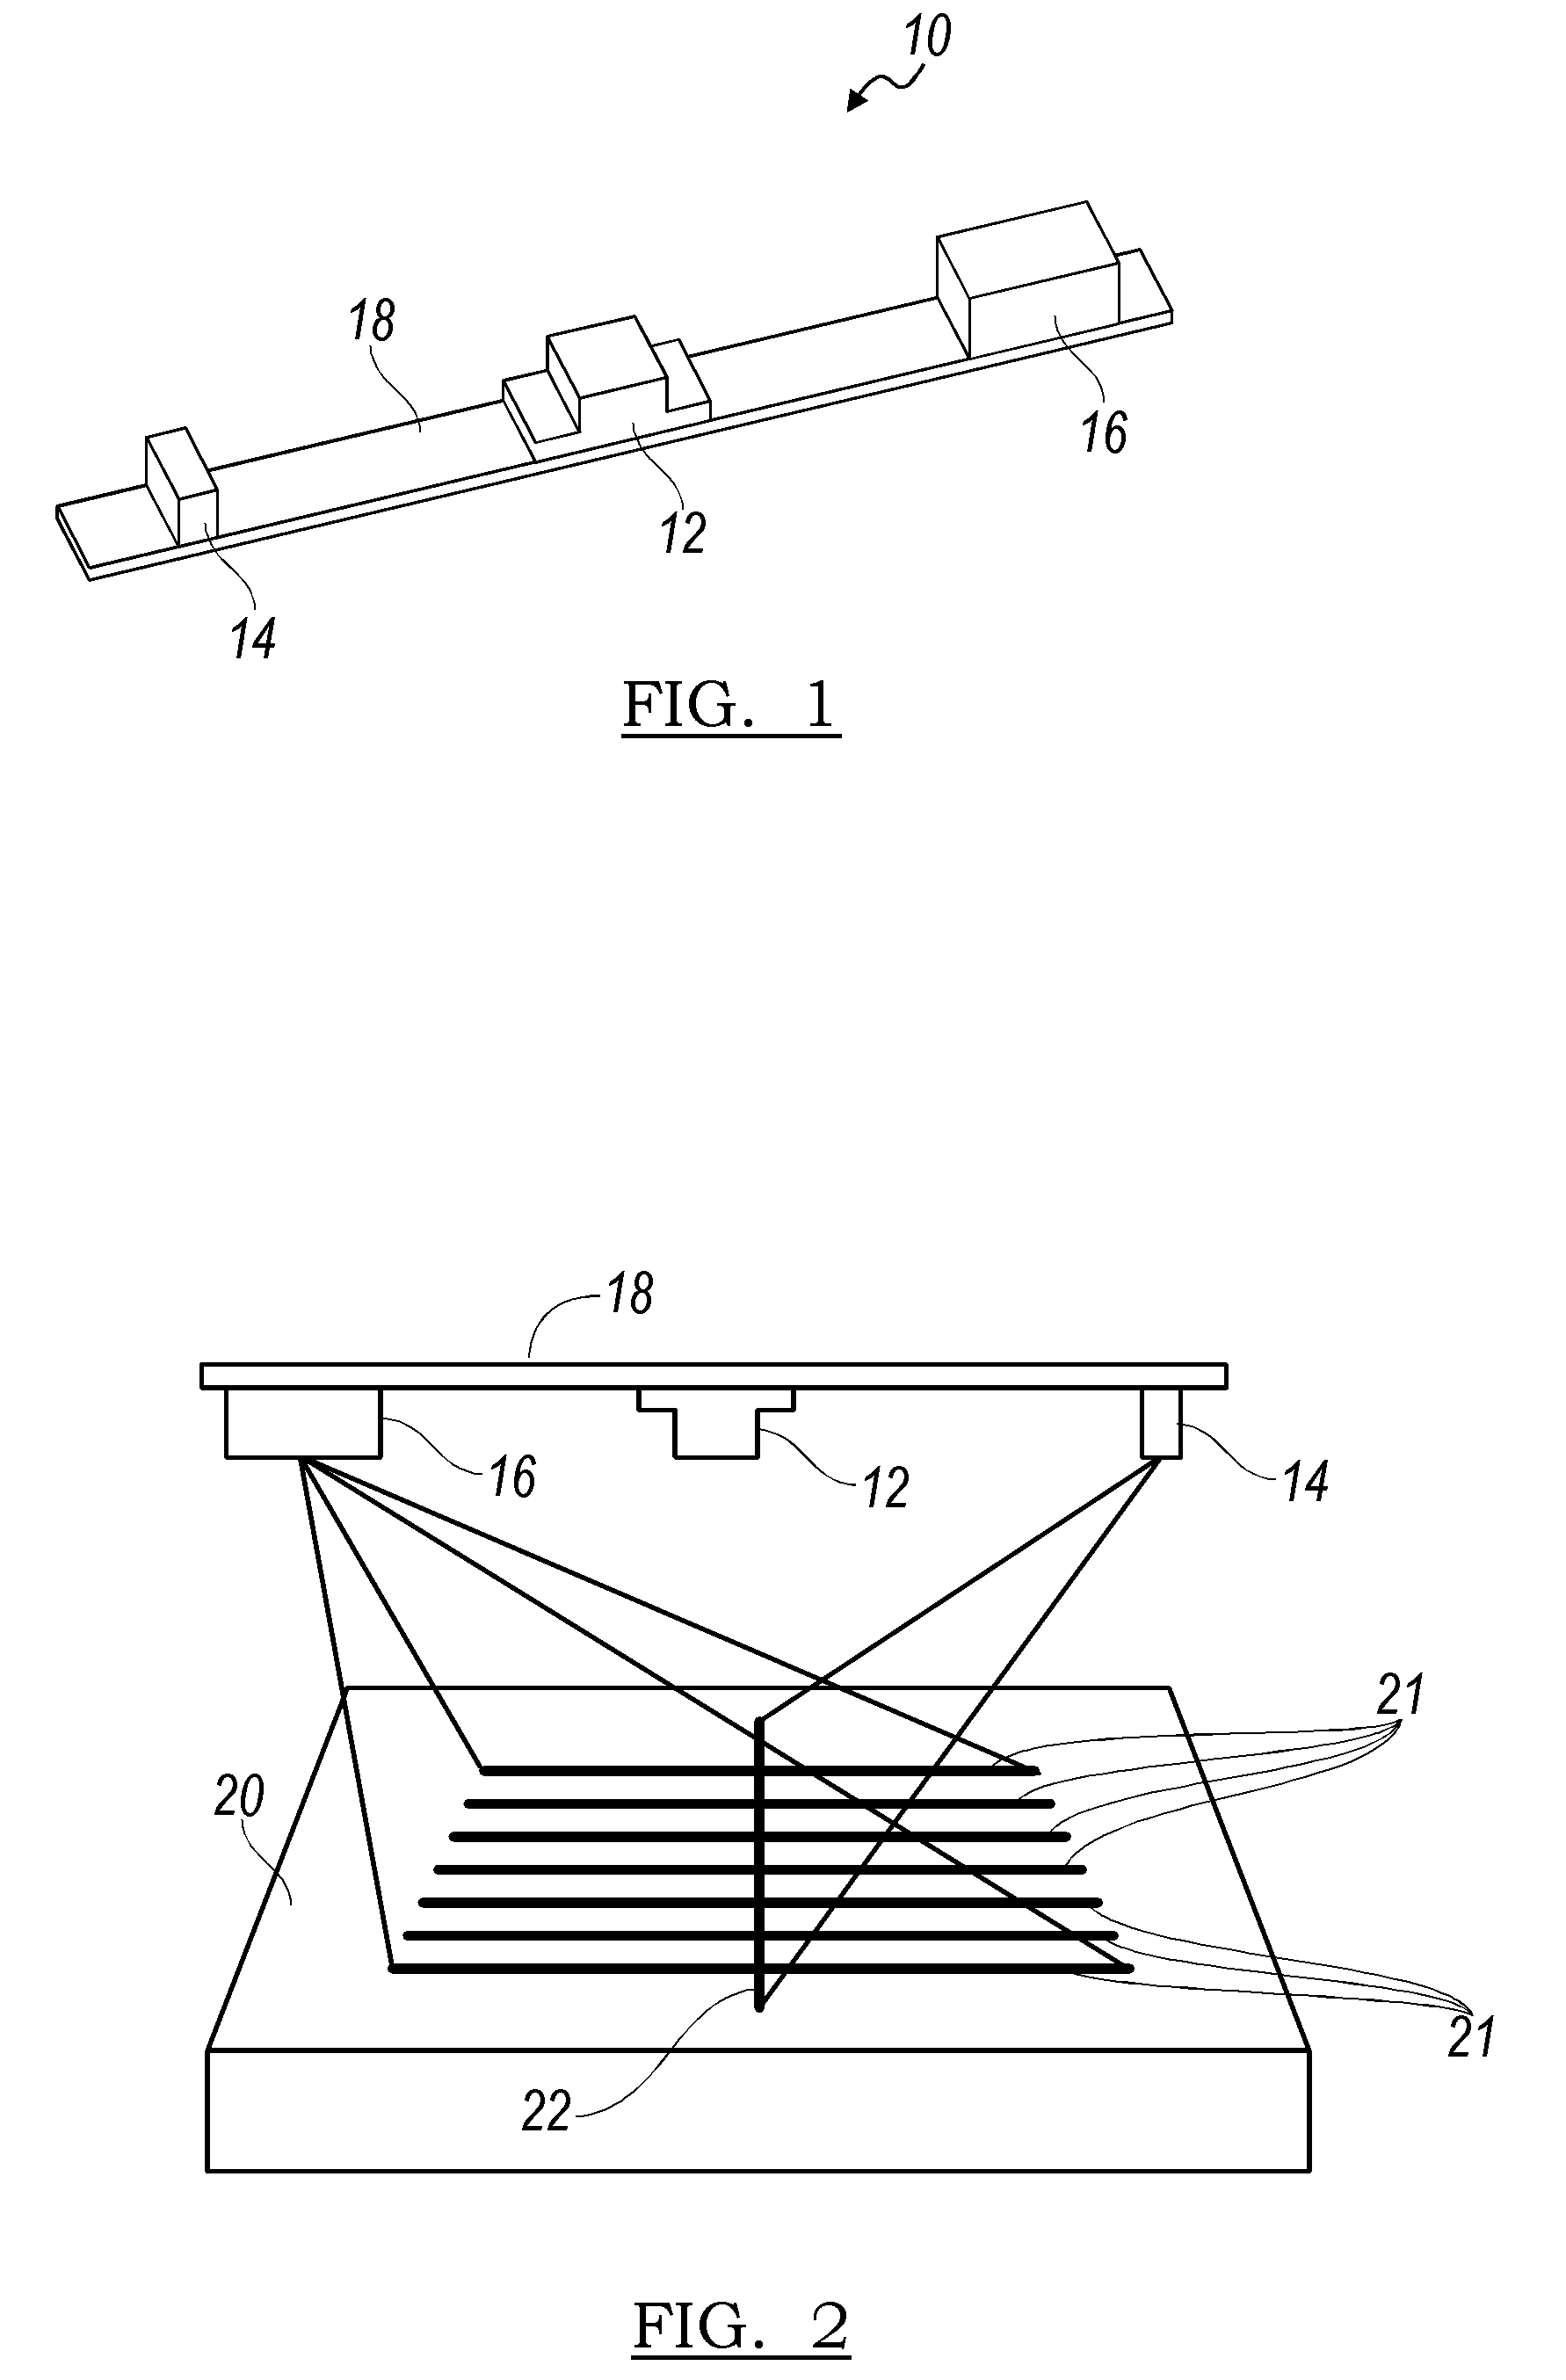 Sensor system and reverse clamping mechanism